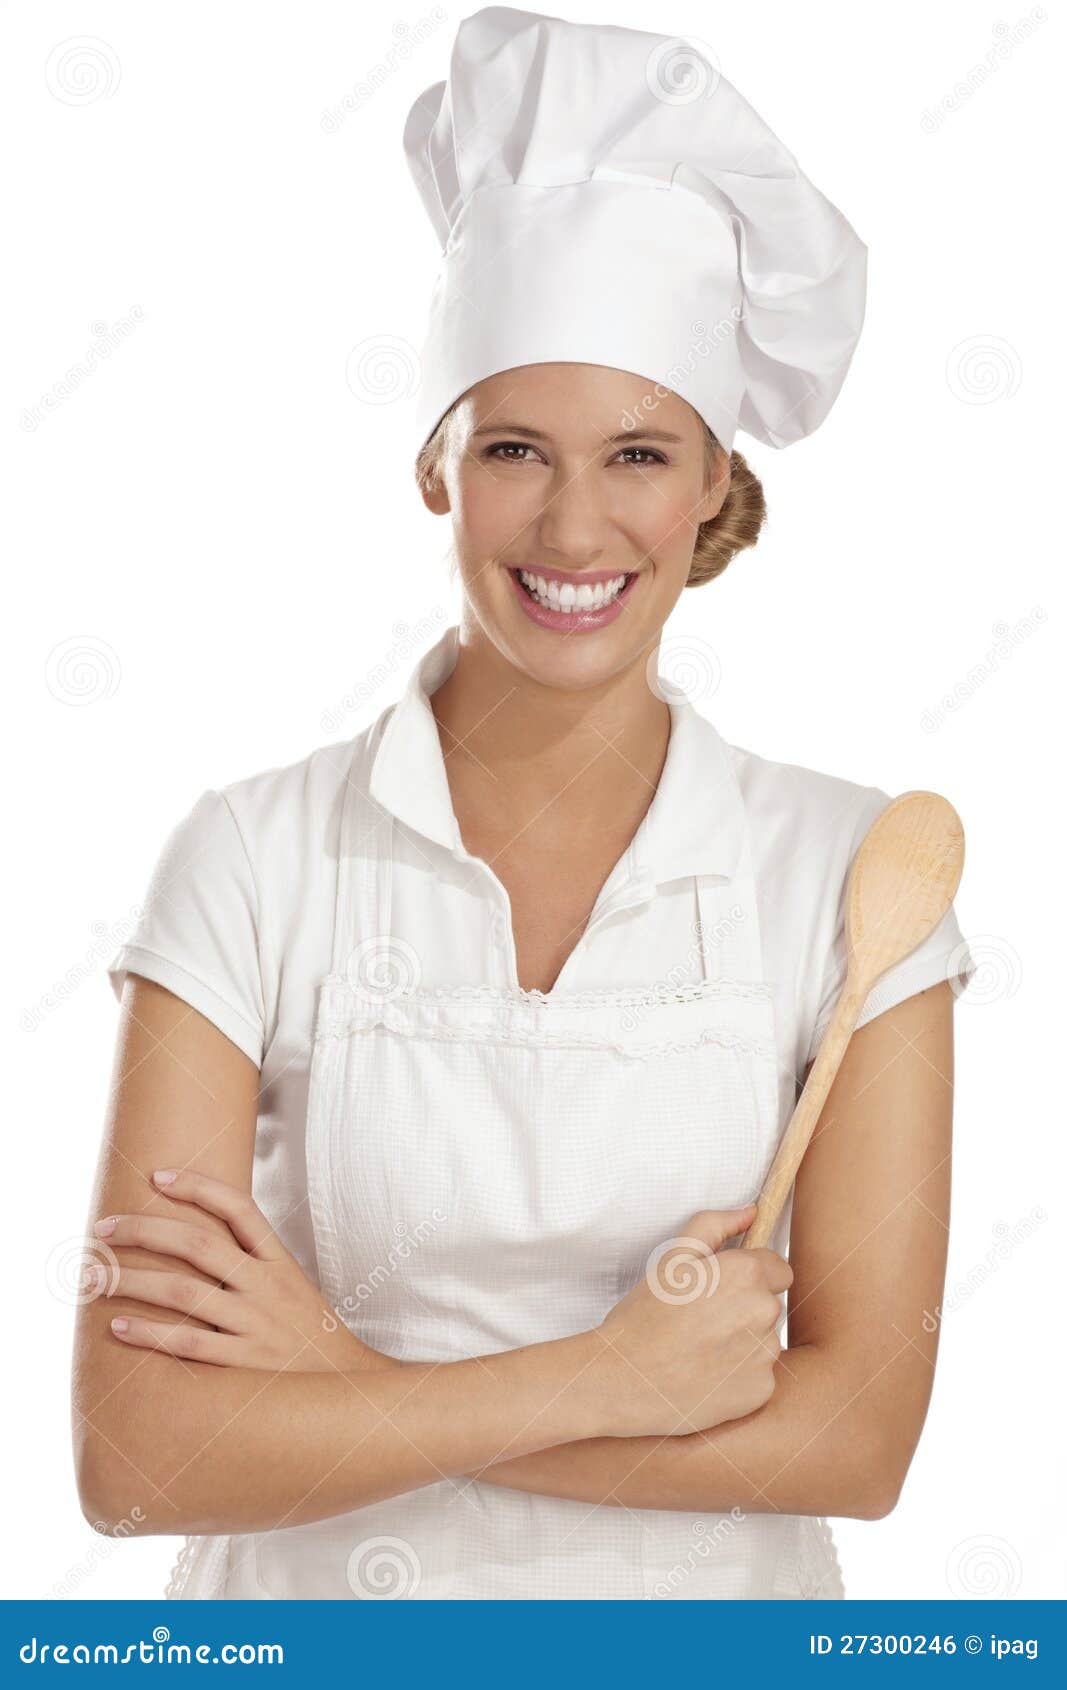 Young woman chef stock photo. Image of industry, isolated - 27300246